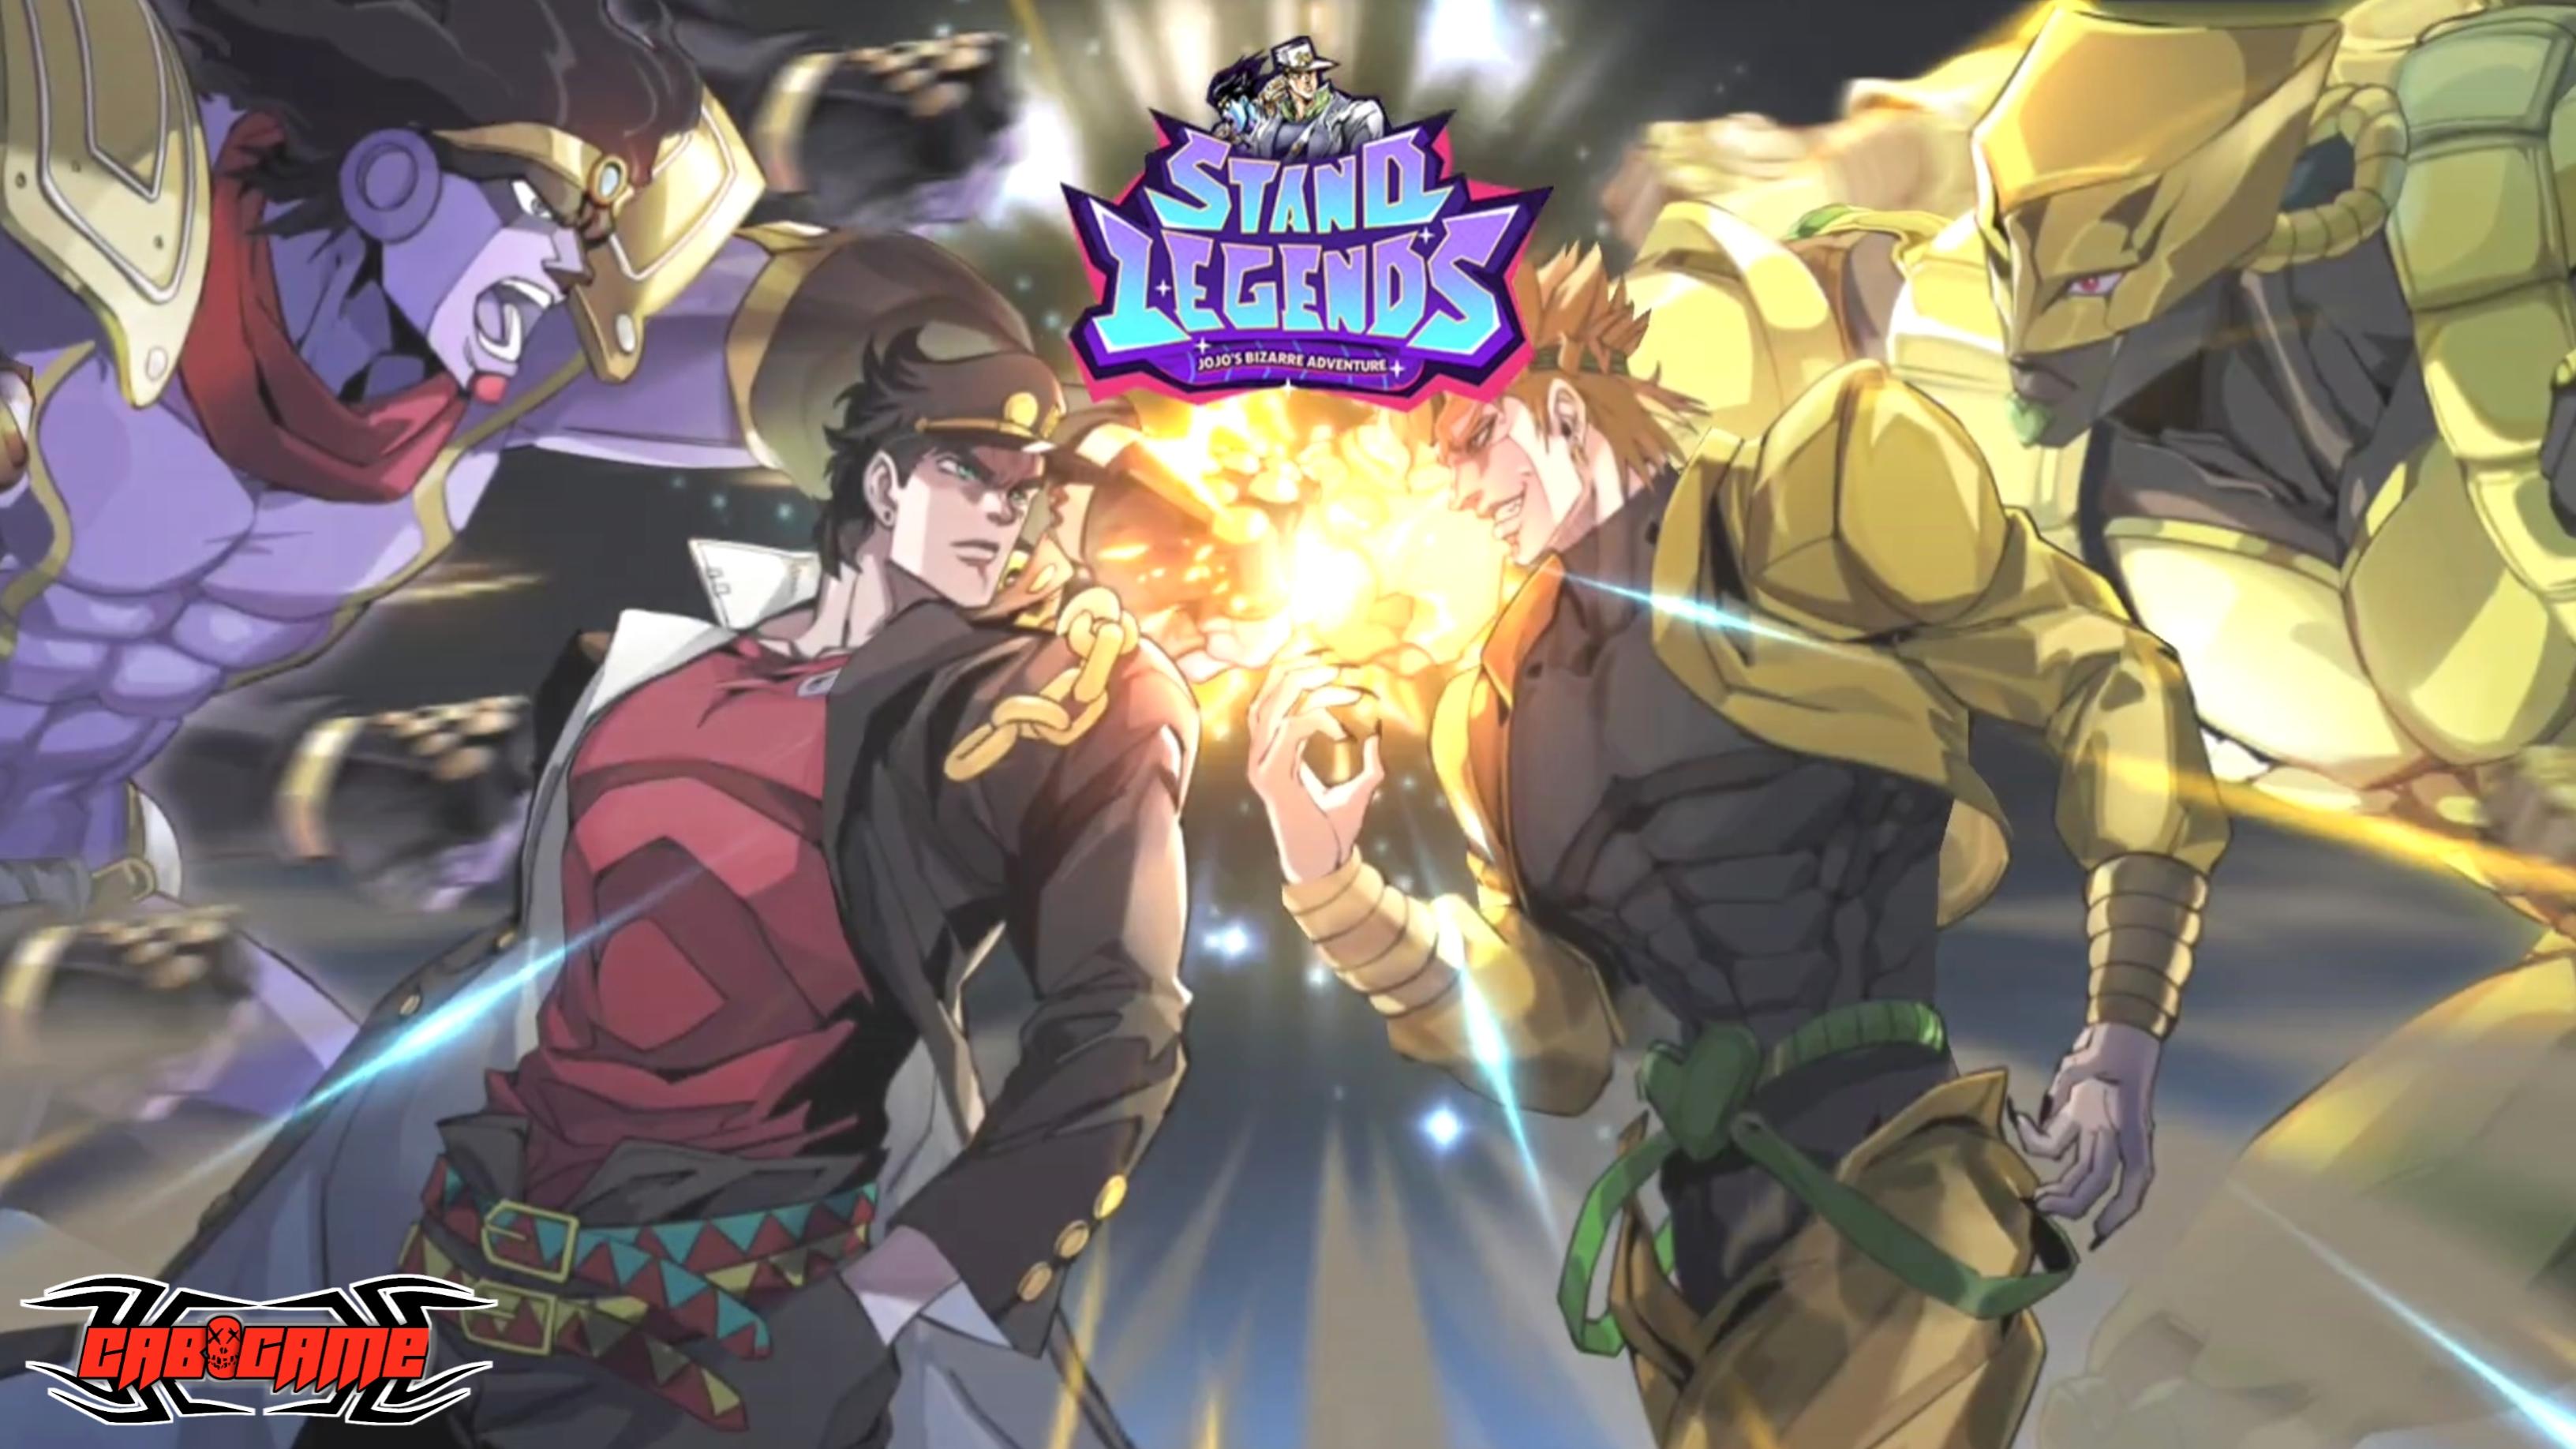 Stand Legends - Gameplay - Android